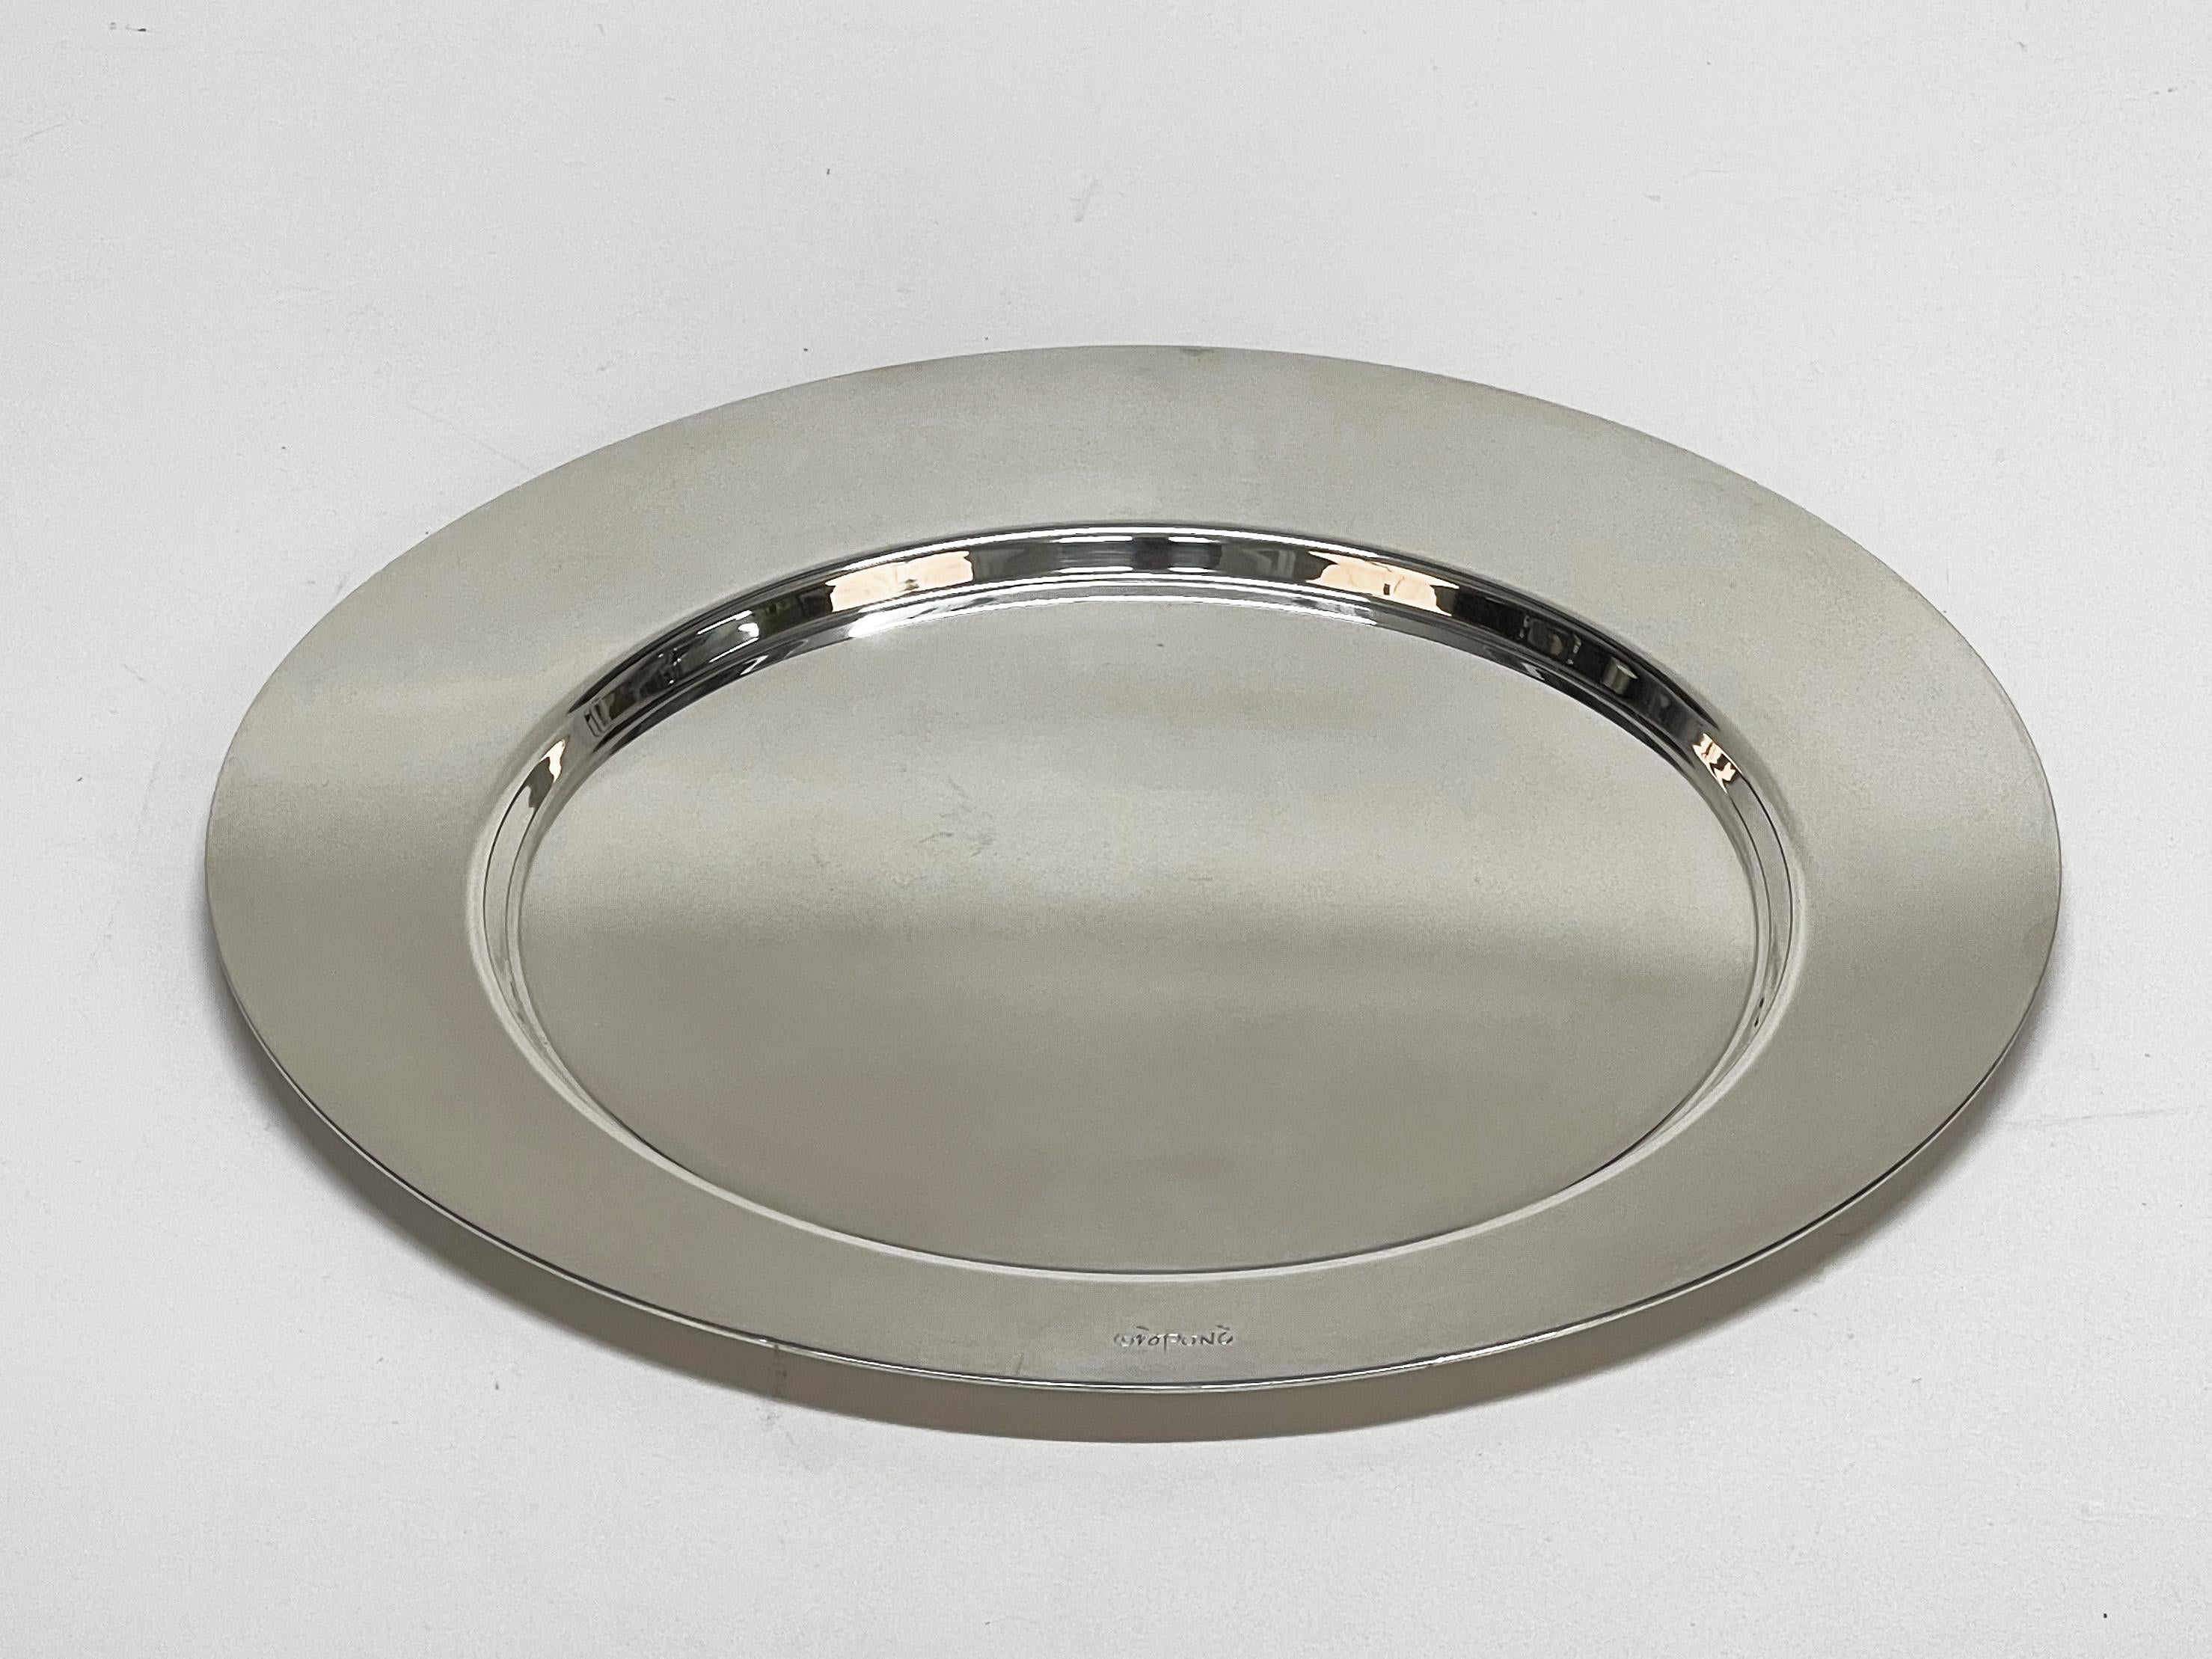 Gio Ponti for Cleto Munari Modernist Silver Plated Serving Plate Italy, 1980s 4